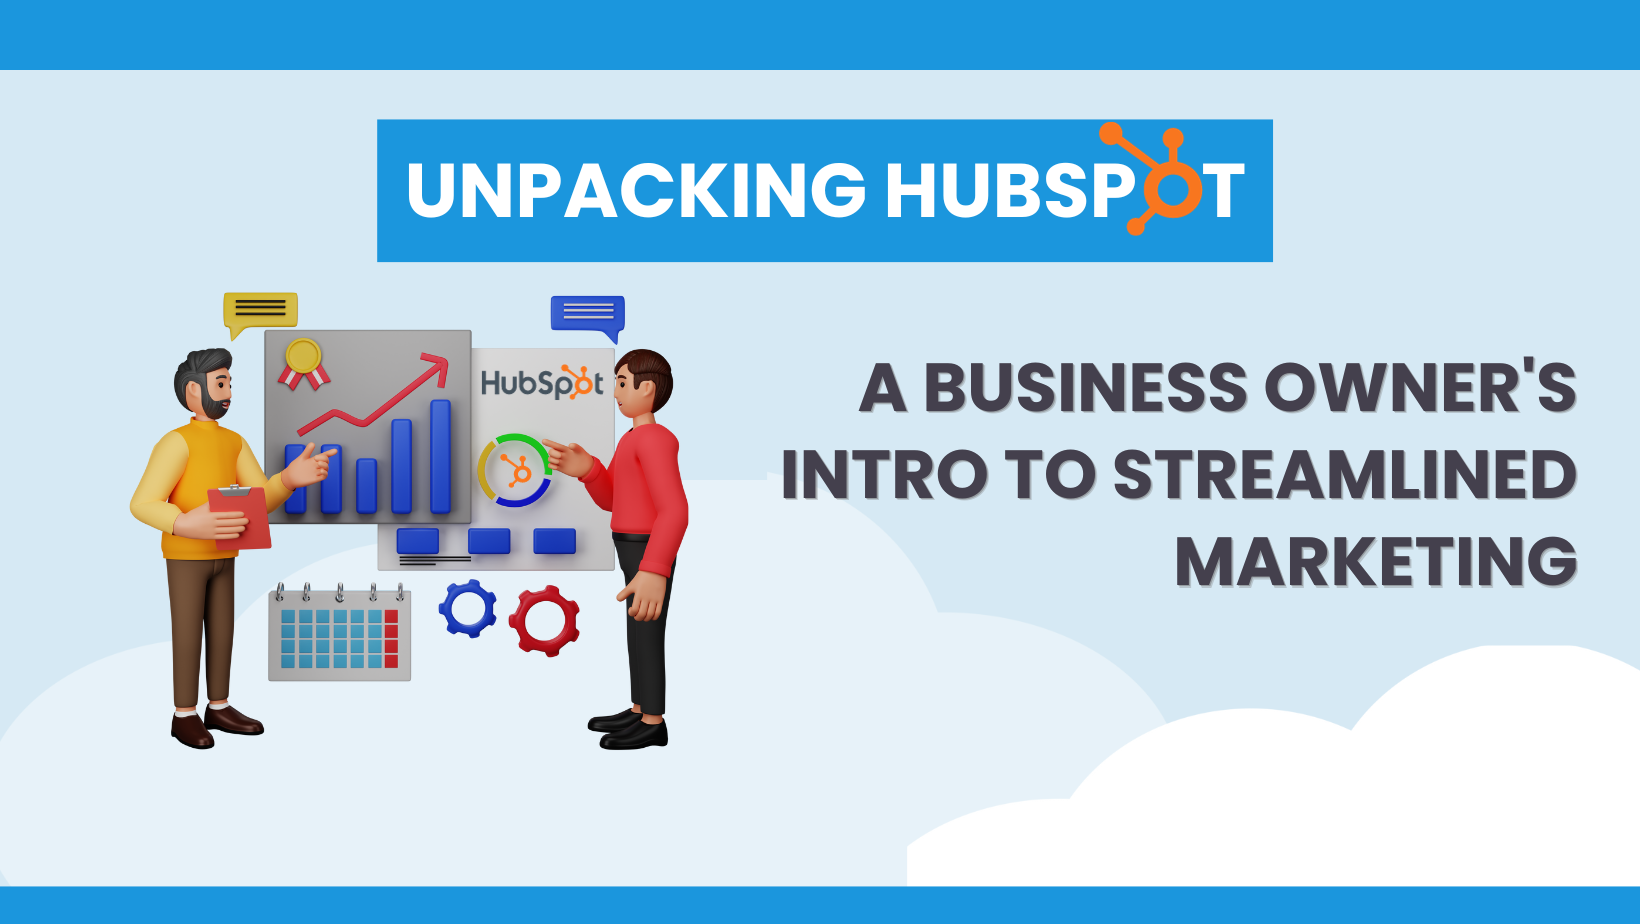 Unpacking HubSpot: A Business Owner's Intro to Streamlined Marketing